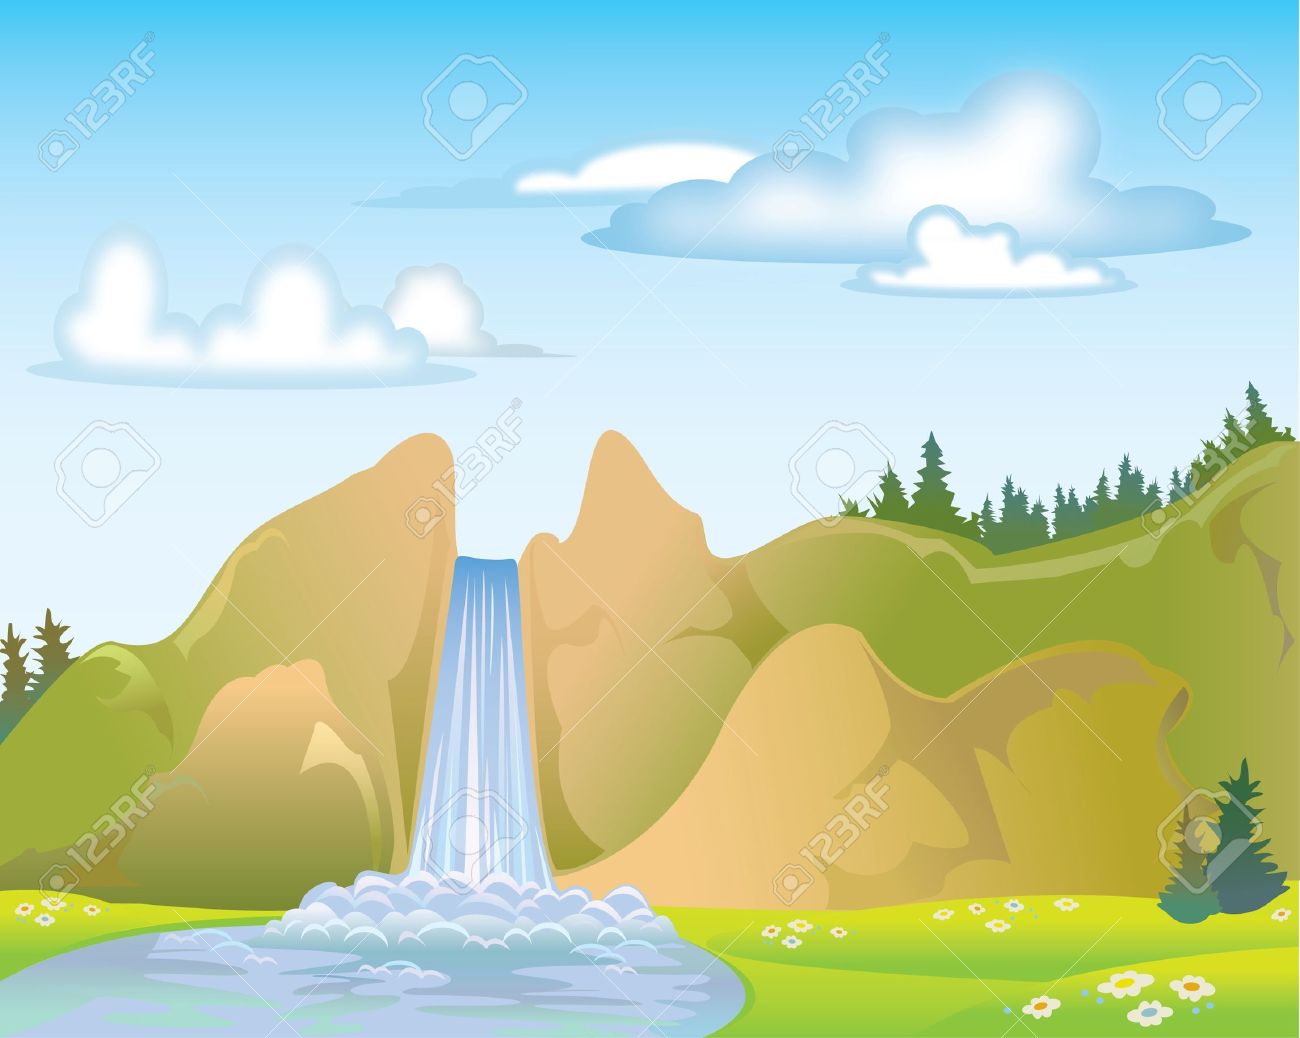 free clipart images waterfalls - photo #20